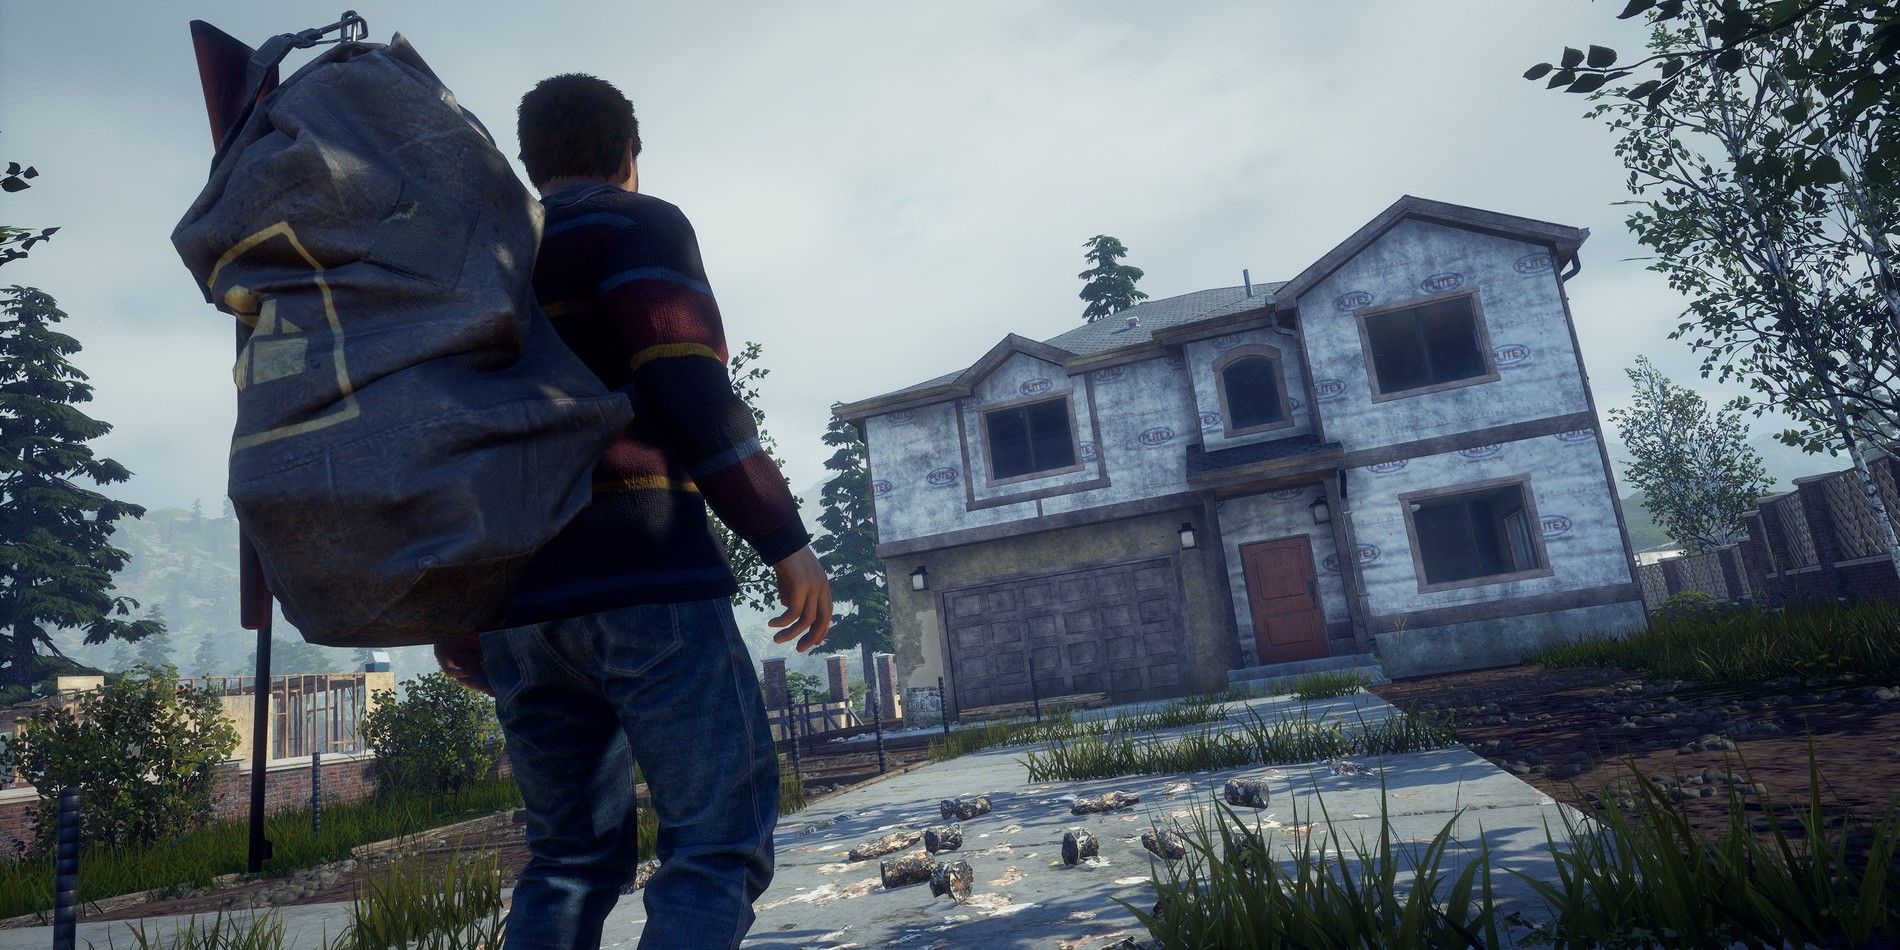 A survivor approaches a house in State of Decay 2.